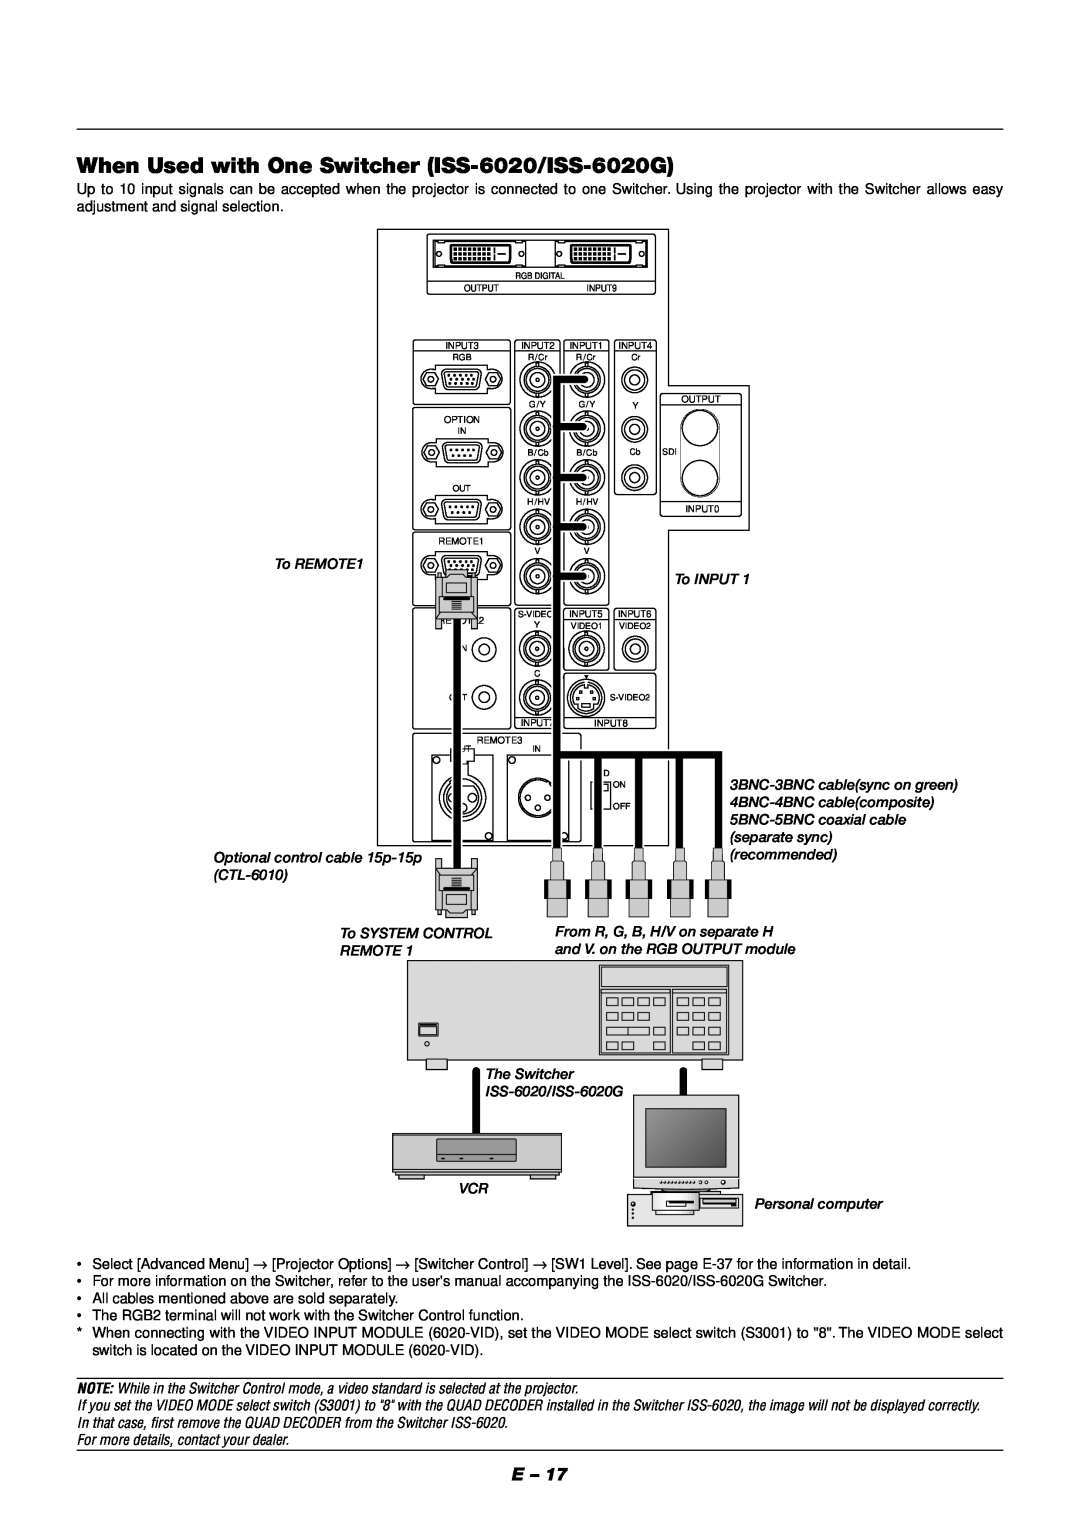 NEC XT9000 user manual When Used with One Switcher ISS-6020/ISS-6020G, For more details, contact your dealer 